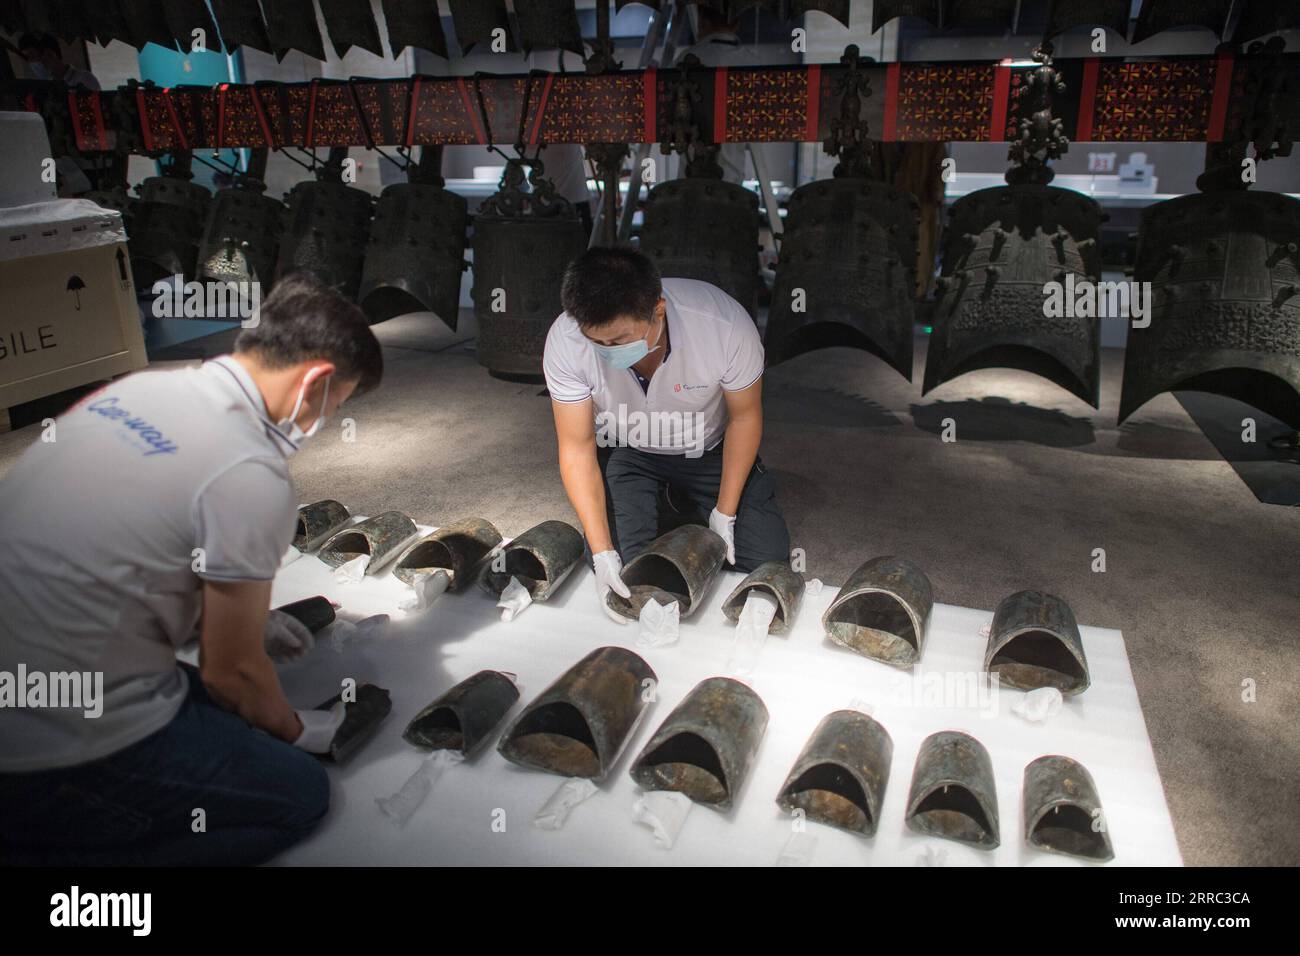 211015 -- WUHAN, Oct. 15, 2021 -- Staff members prepare to install chime bells after they were transferred to a newly-built exhibition hall of Hubei Provincial Museum in Wuhan, central China s Hubei Province, Oct. 15, 2021. The set of chime bells were recently relocated to the newly-built third phase project of the museum. Chime bell, or bian zhong in Chinese, is a percussion instrument that became prevalent in China from the Western Zhou Dynasty 1046-771 B.C.. The country s largest set of chime bells ever unearthed was found in 1978, also in Suizhou, in the tomb of Marquis Yi, a ruler of the Stock Photo